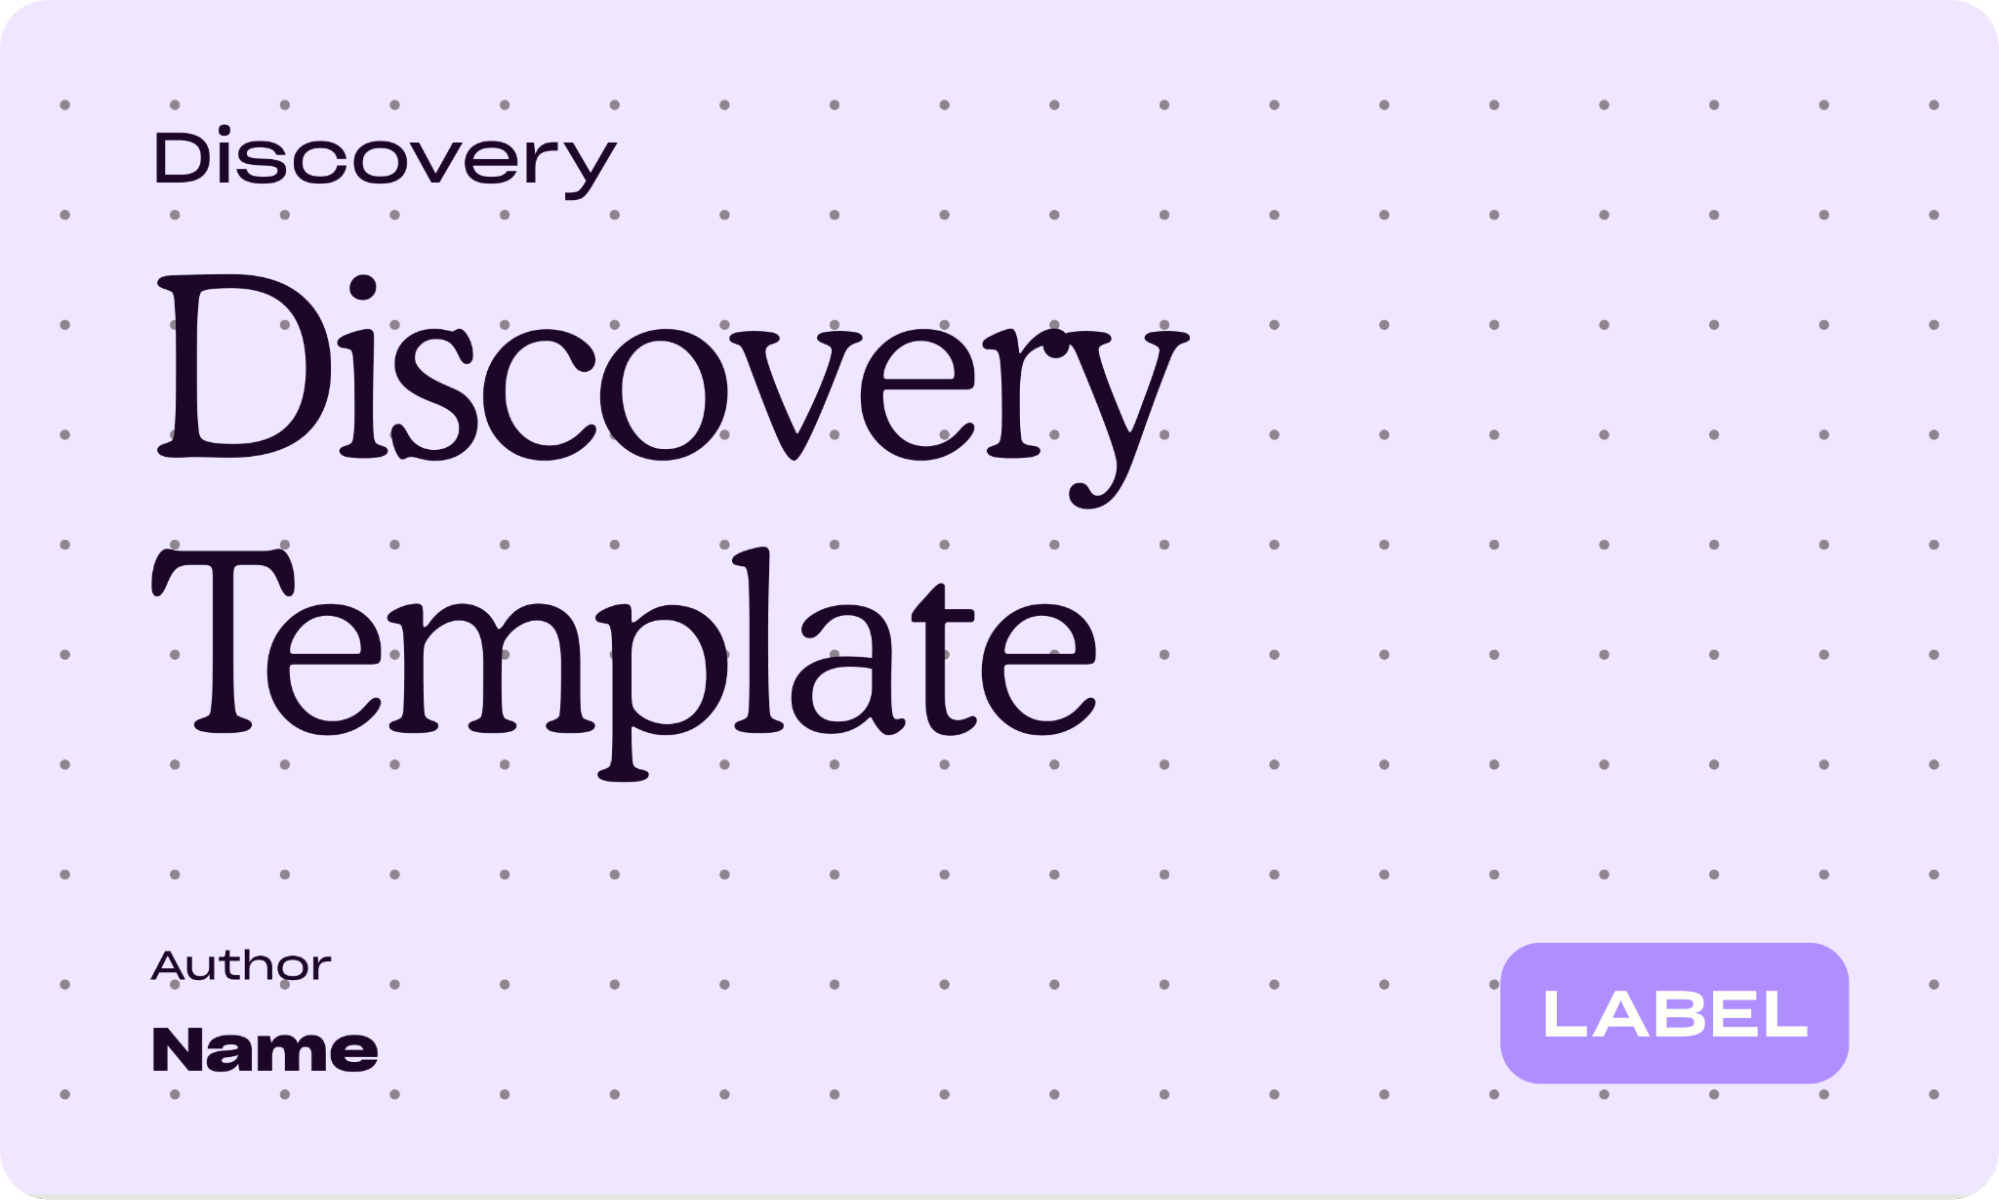 Our Figma Discovery template cover page with label and author